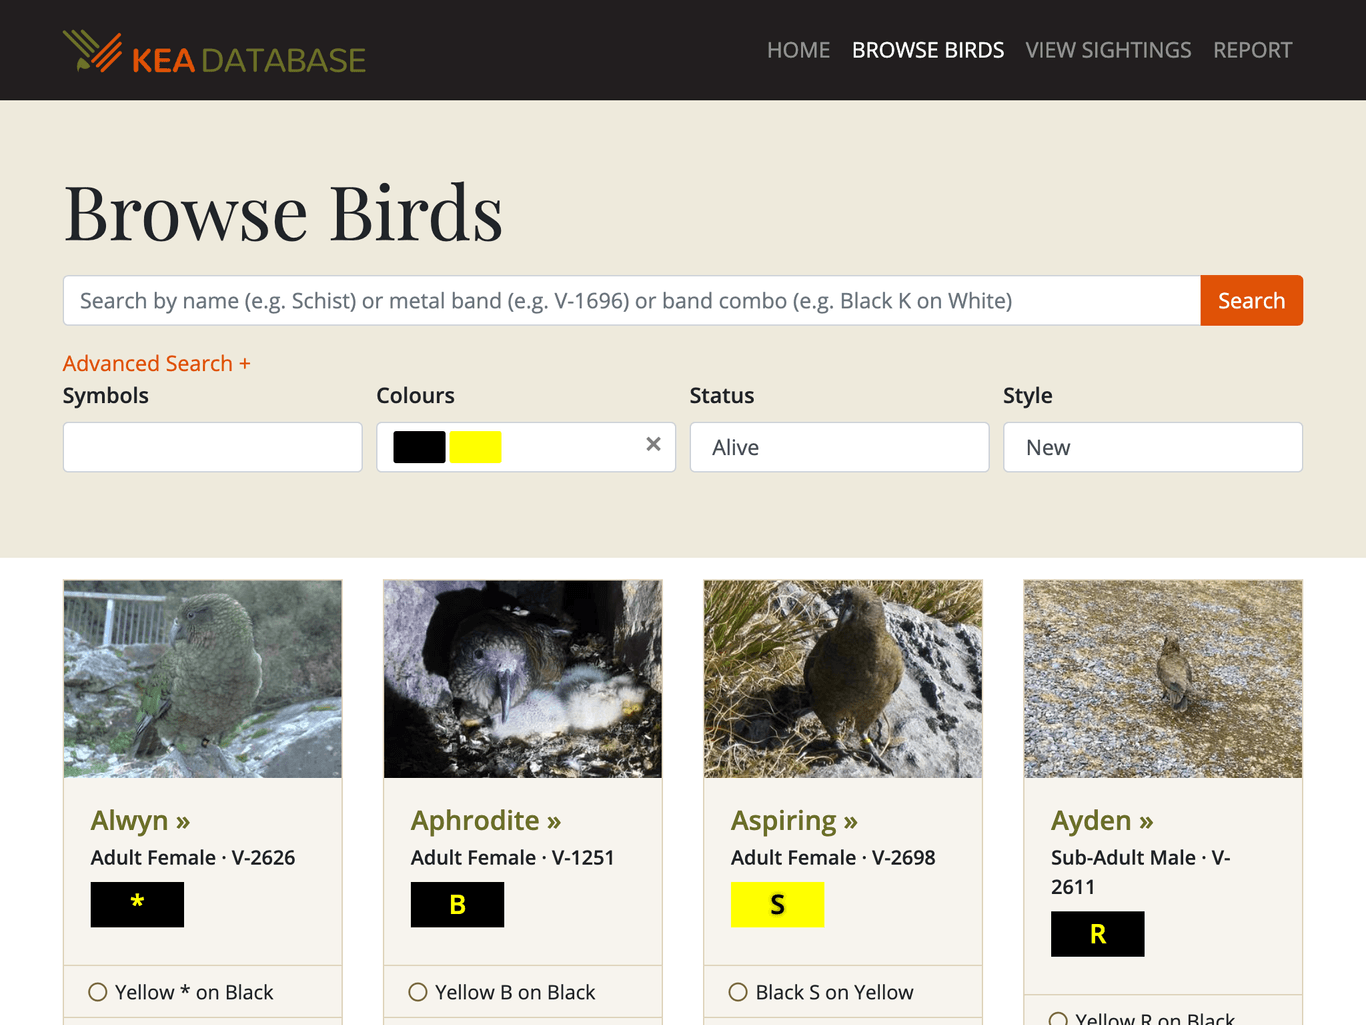 Screenshot of the 'Browse Birds' page